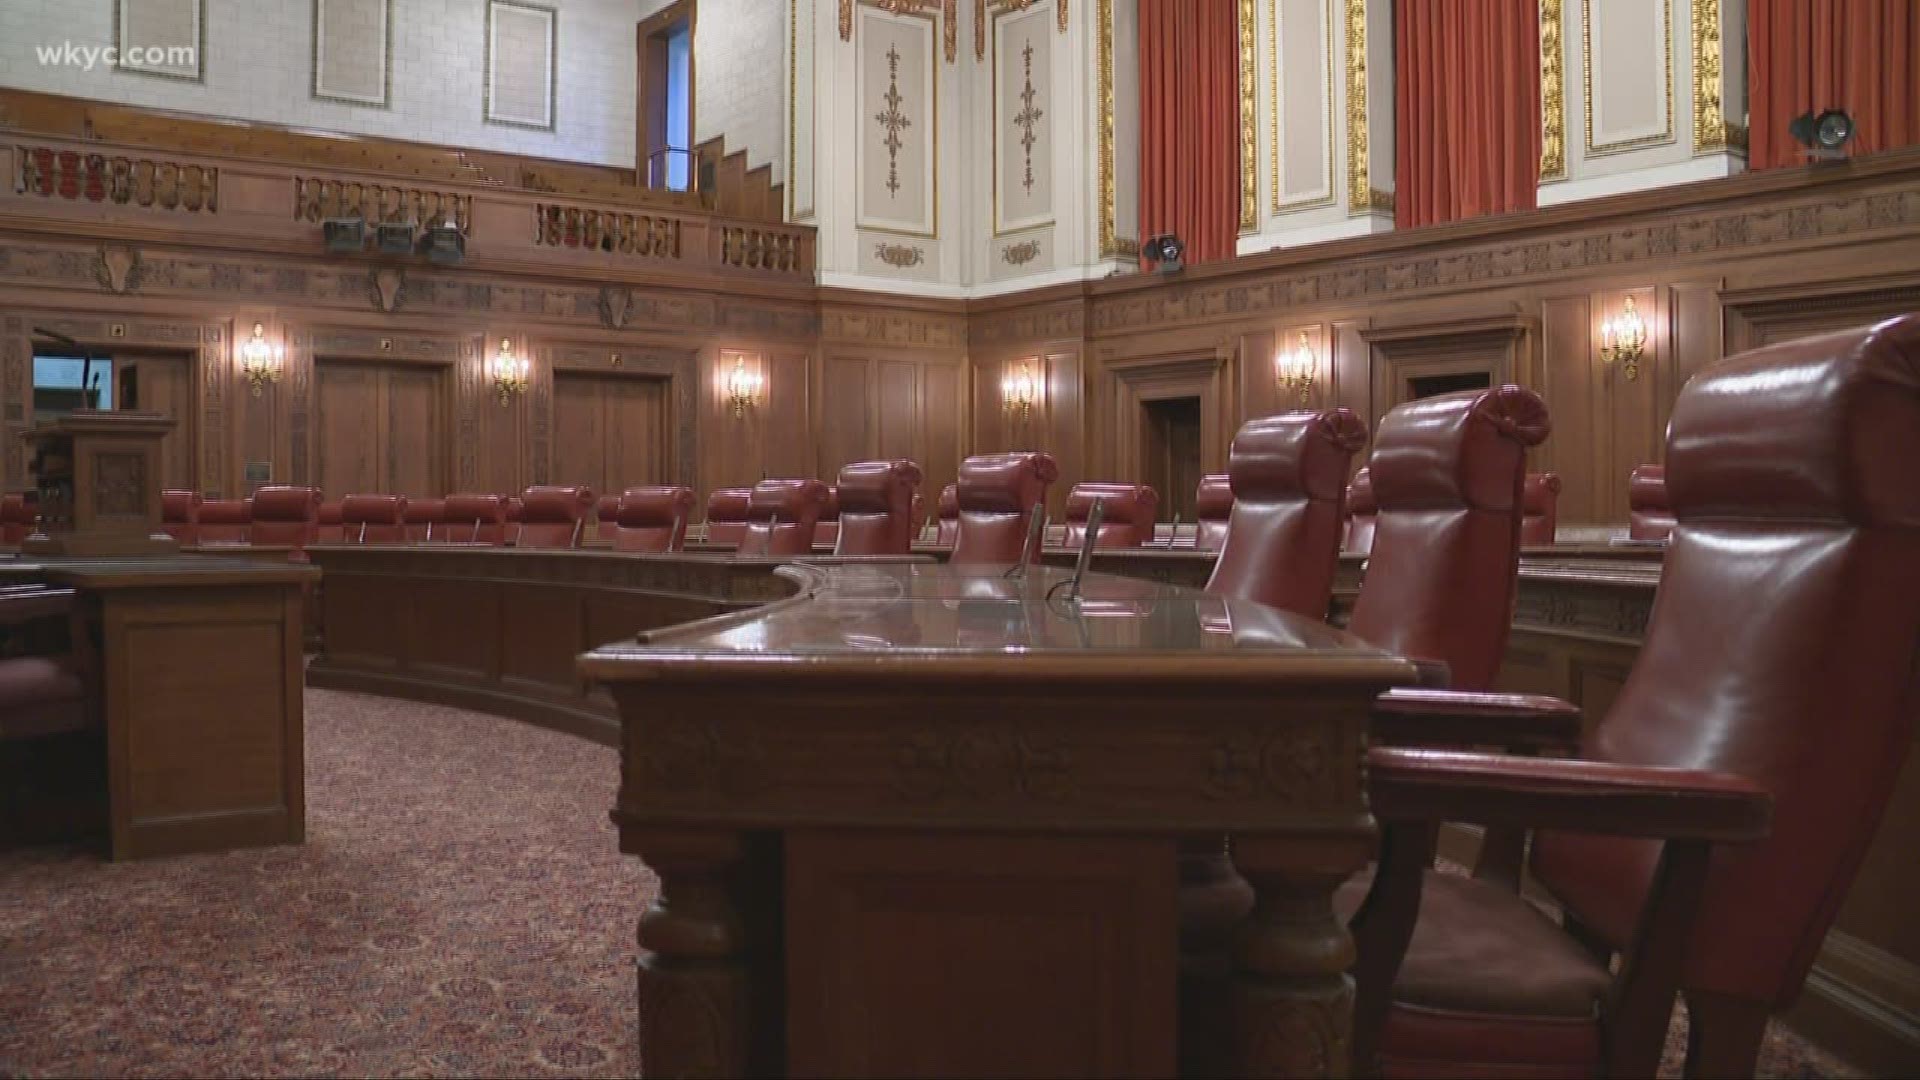 Big changes could be coming to Cleveland City Hall. Changes that wil be debated next week include fewer council members who would make less money.